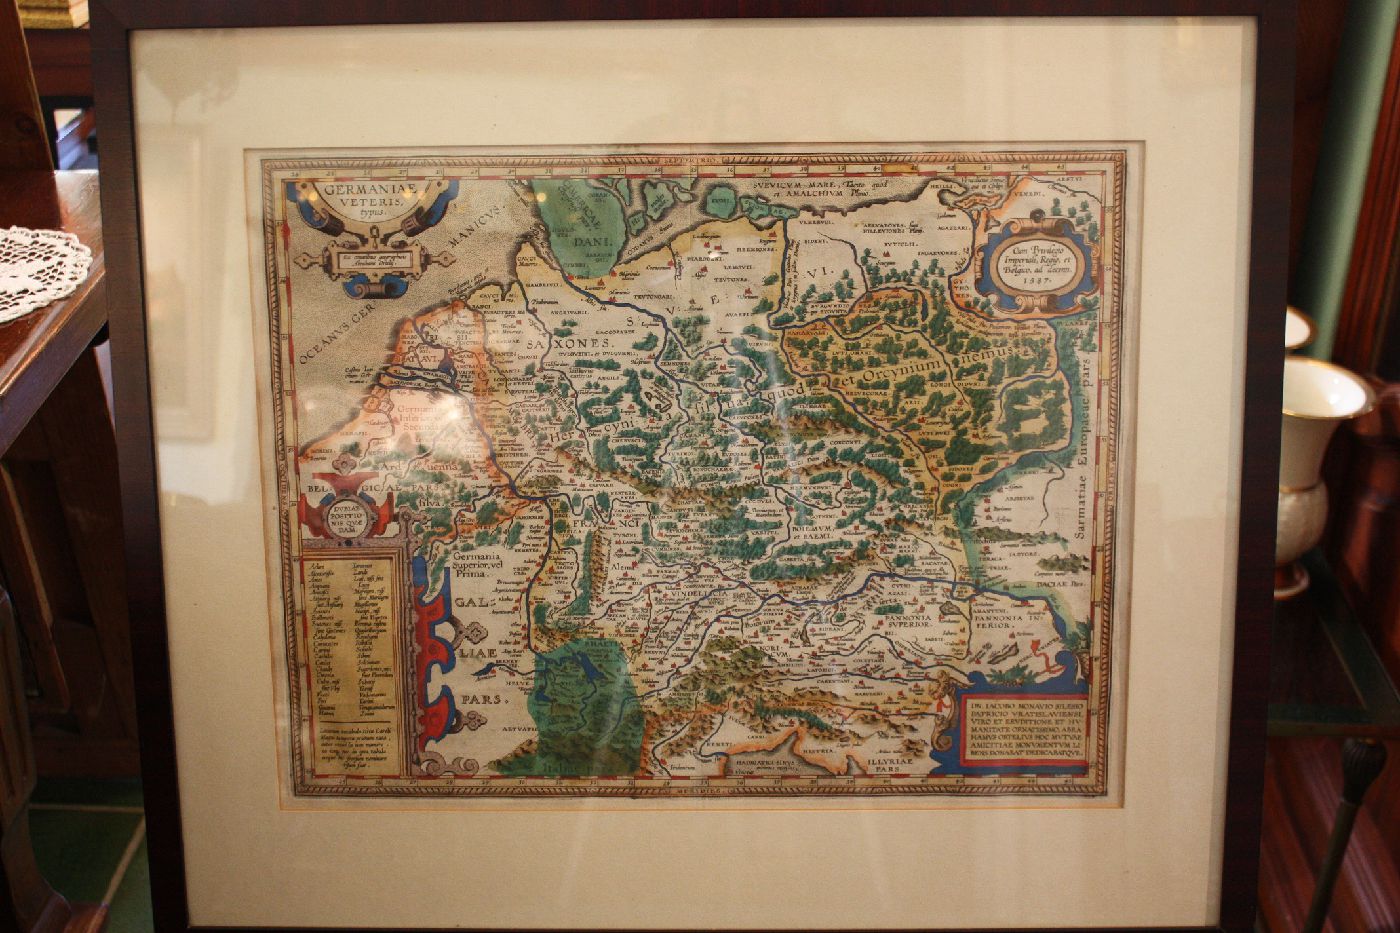 A 1600's coloured copper engraving map showing North Germany by Abraham Ortelius